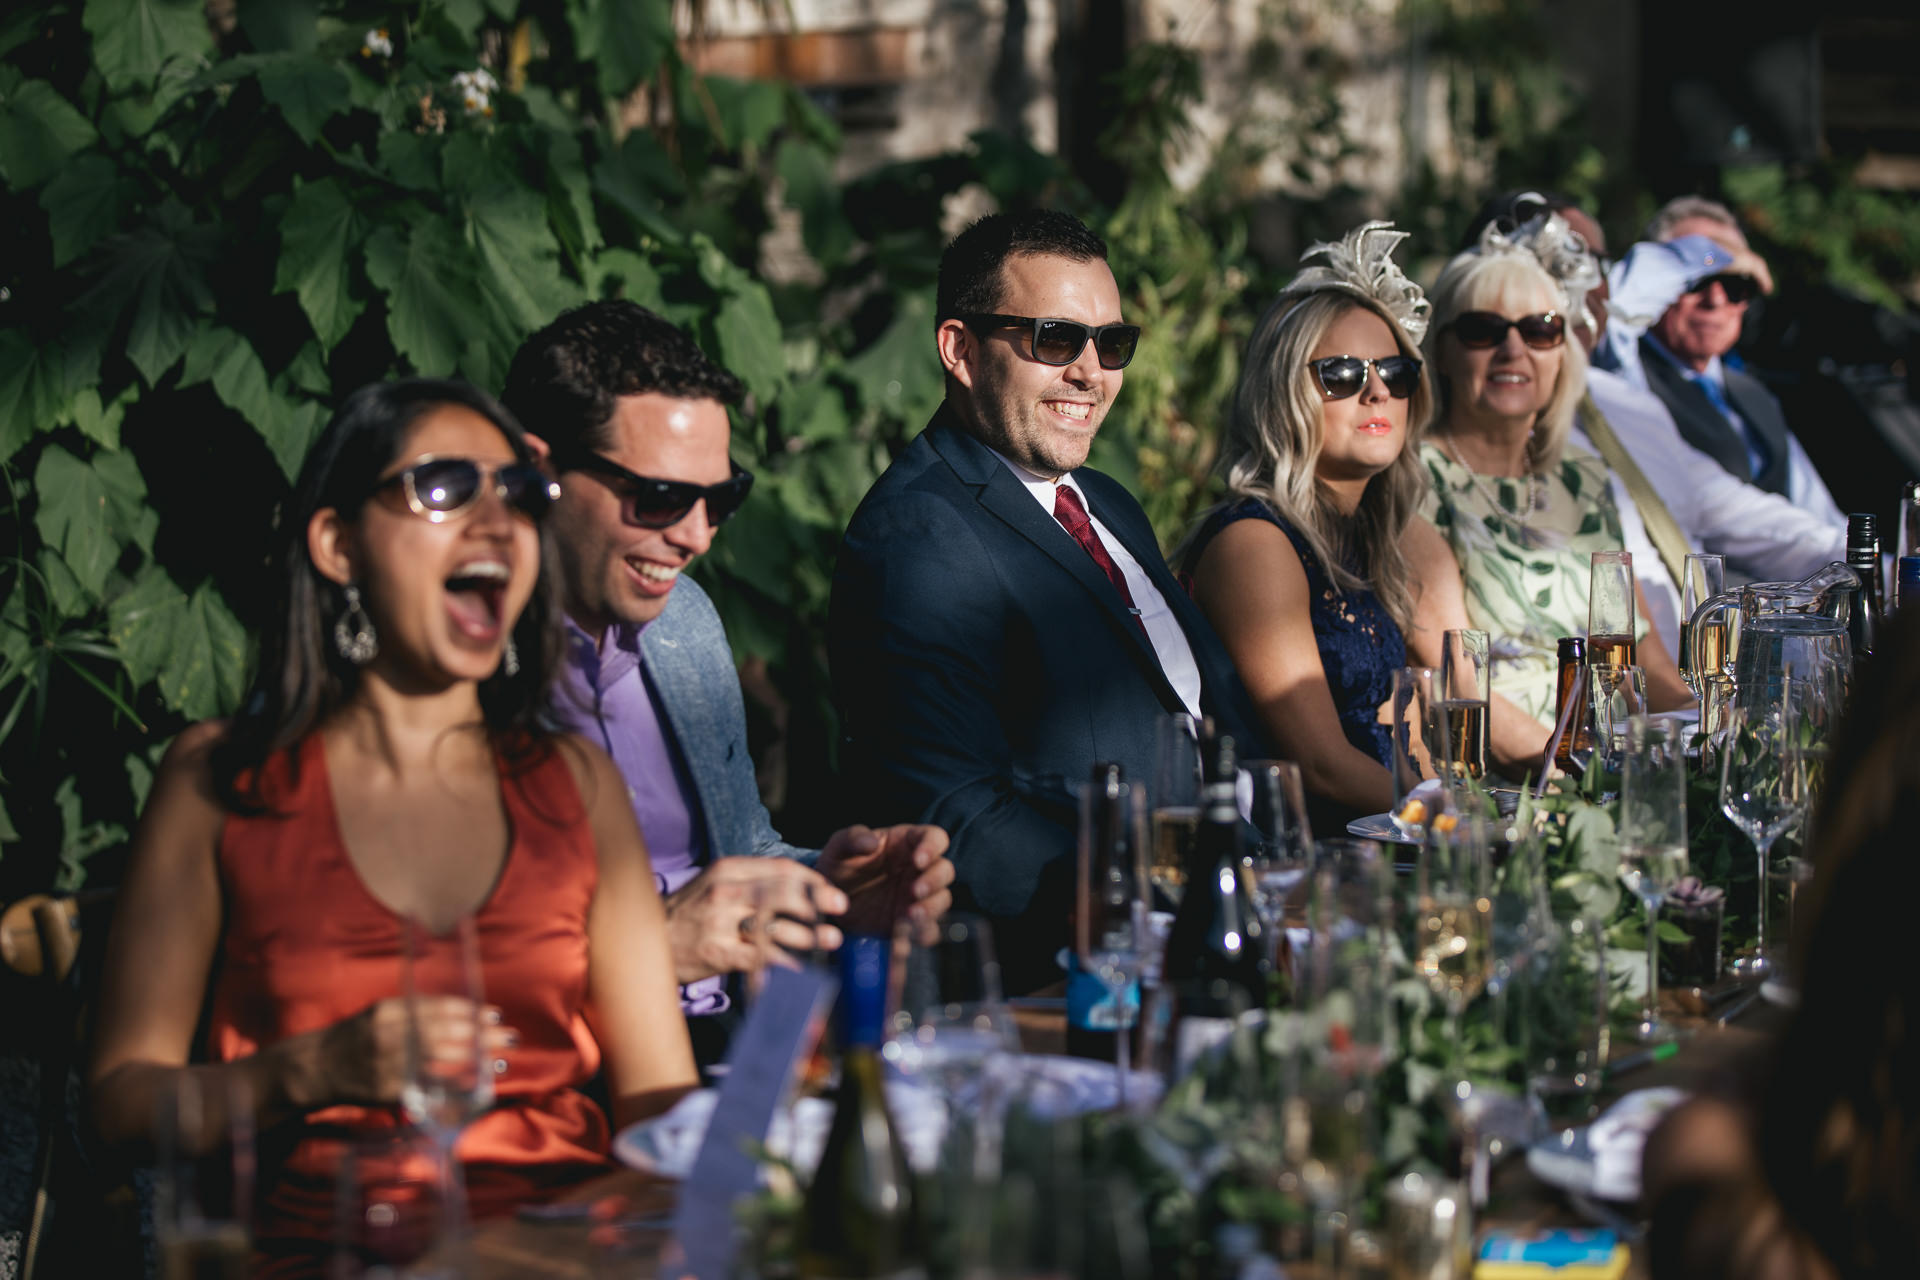 Wedding guests in sunglasses 